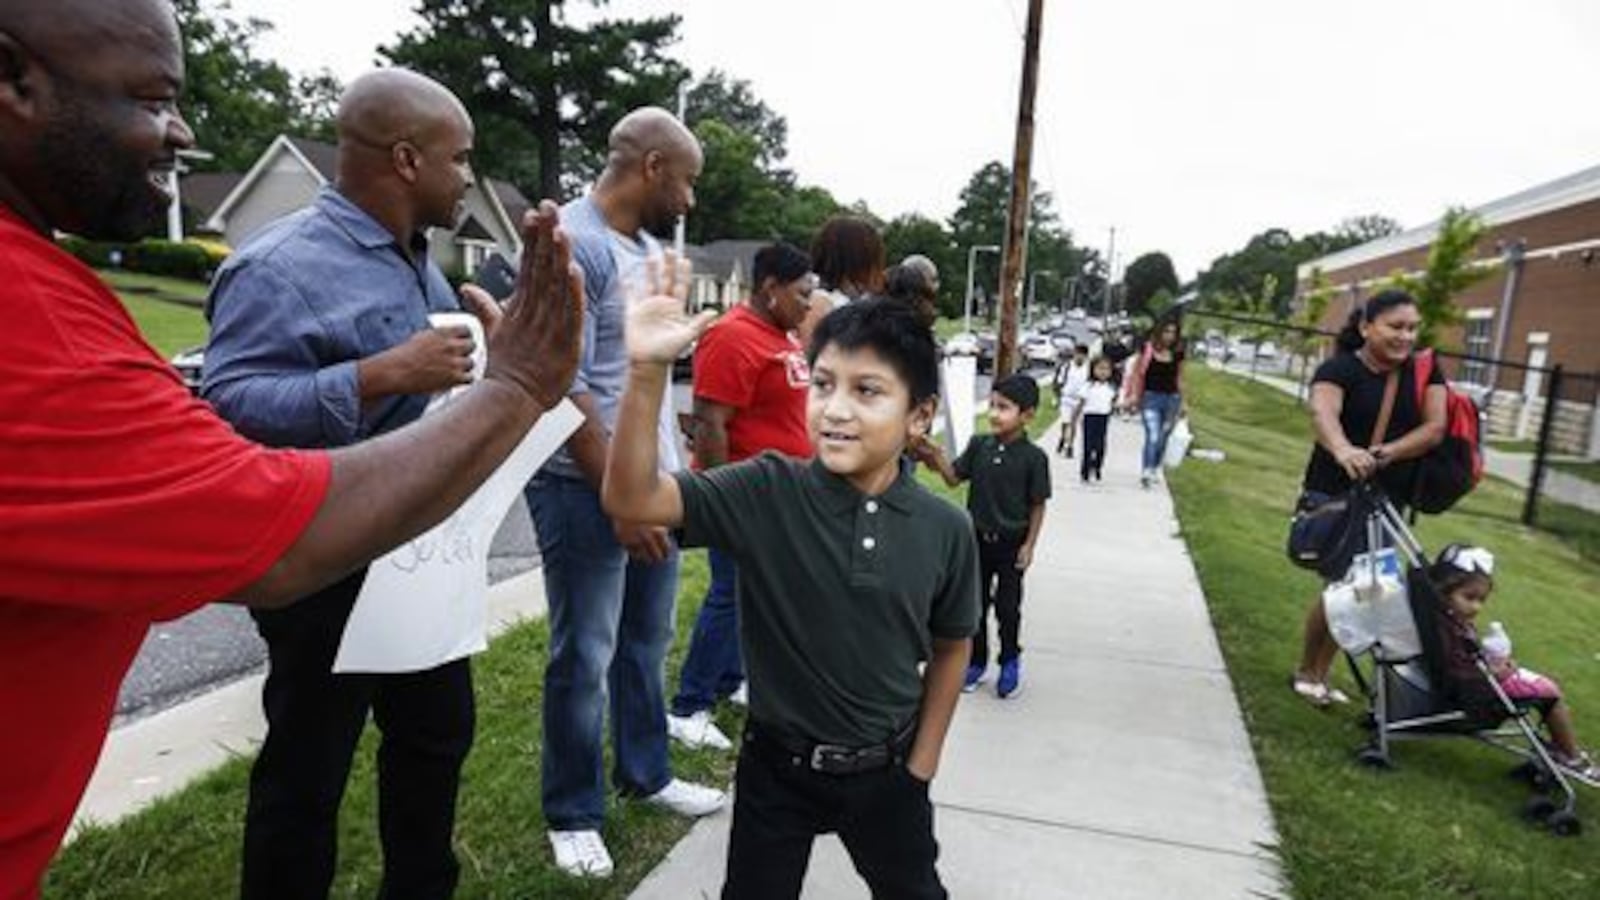 Third-grader Juan de la Cruz is welcomed back to class on Aug. 7 at Belle Forest Community School in Memphis. The back-to-school reception was organized by a neighborhood church as a show of support for students as the city's Hispanic community dealt with recent immigration arrests.